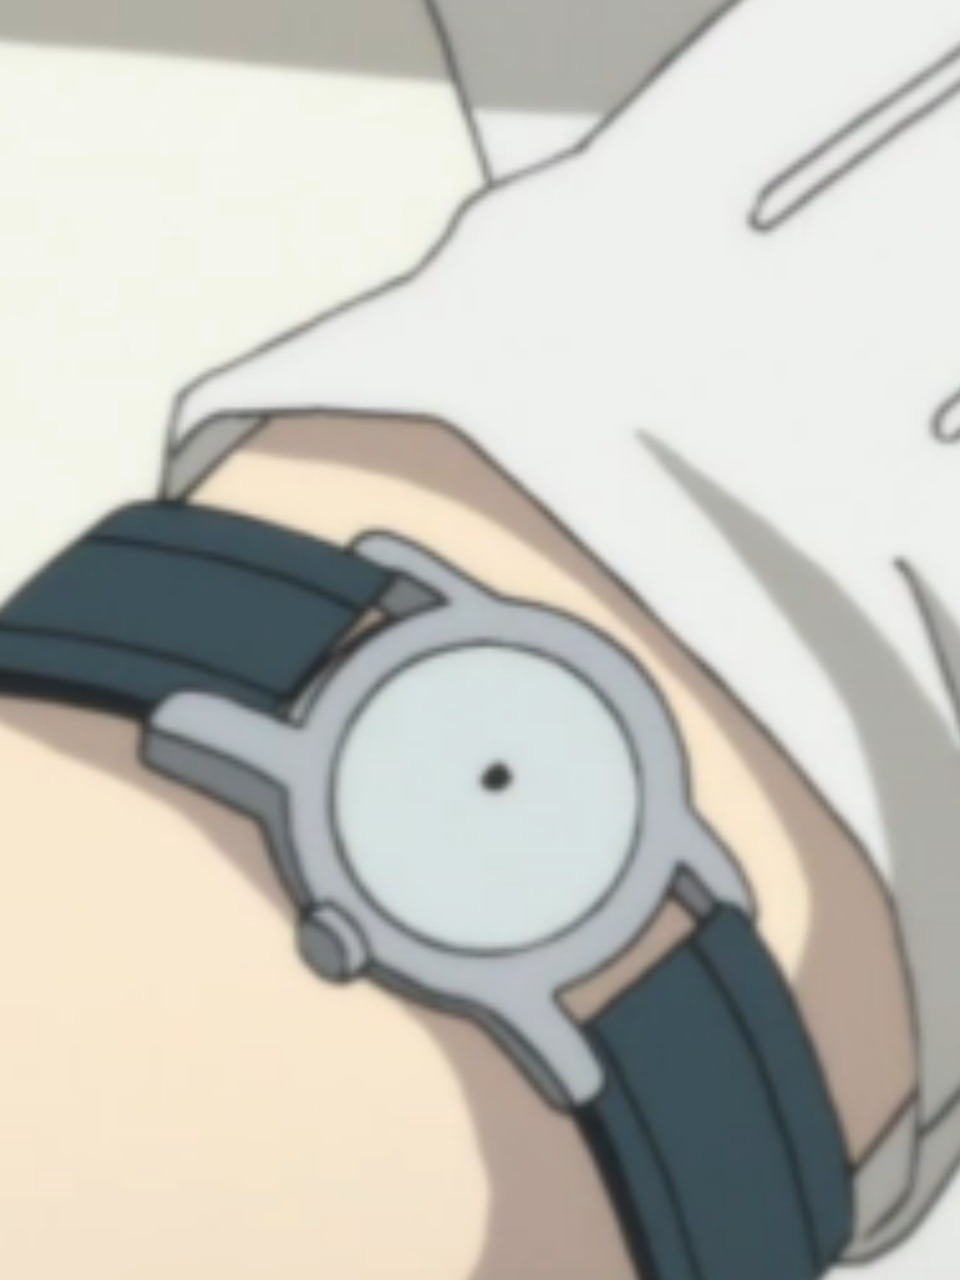 toue-company:  Is this his coil or is it a watch- “what time is it clear?” “Yes